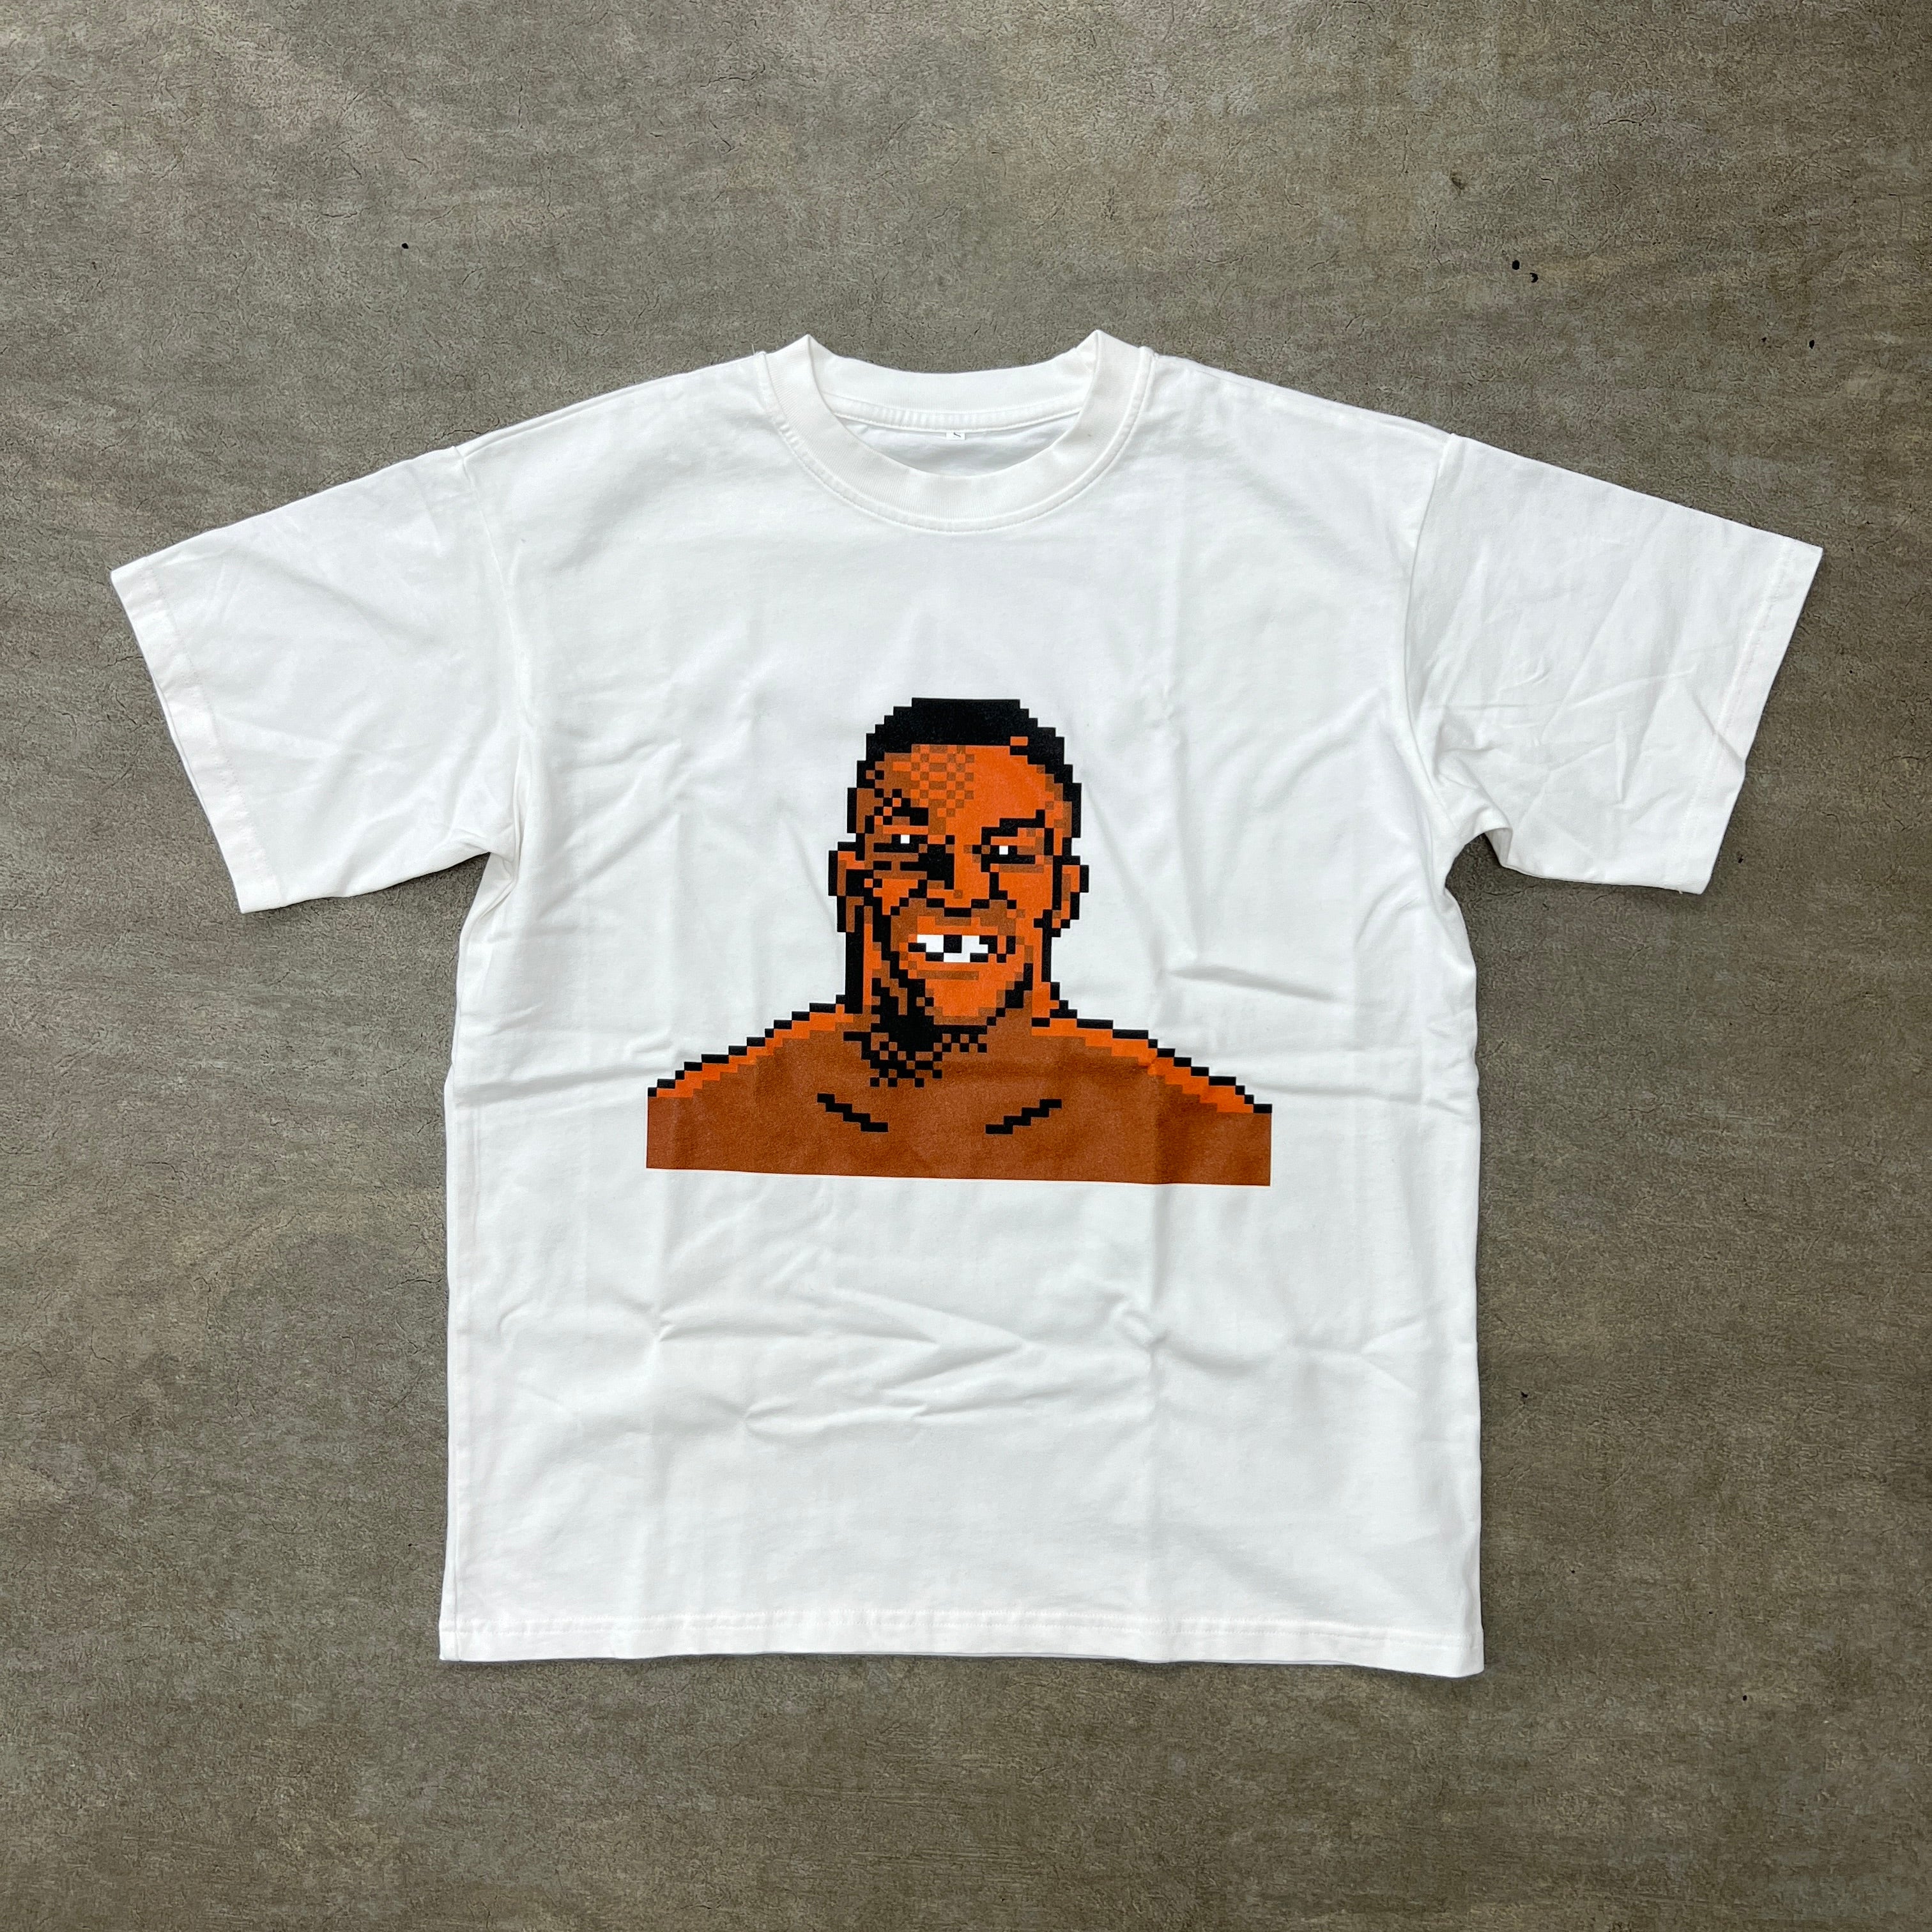 Soled Out T-Shirt &quot;MIKE TYSON&quot; White New Size M